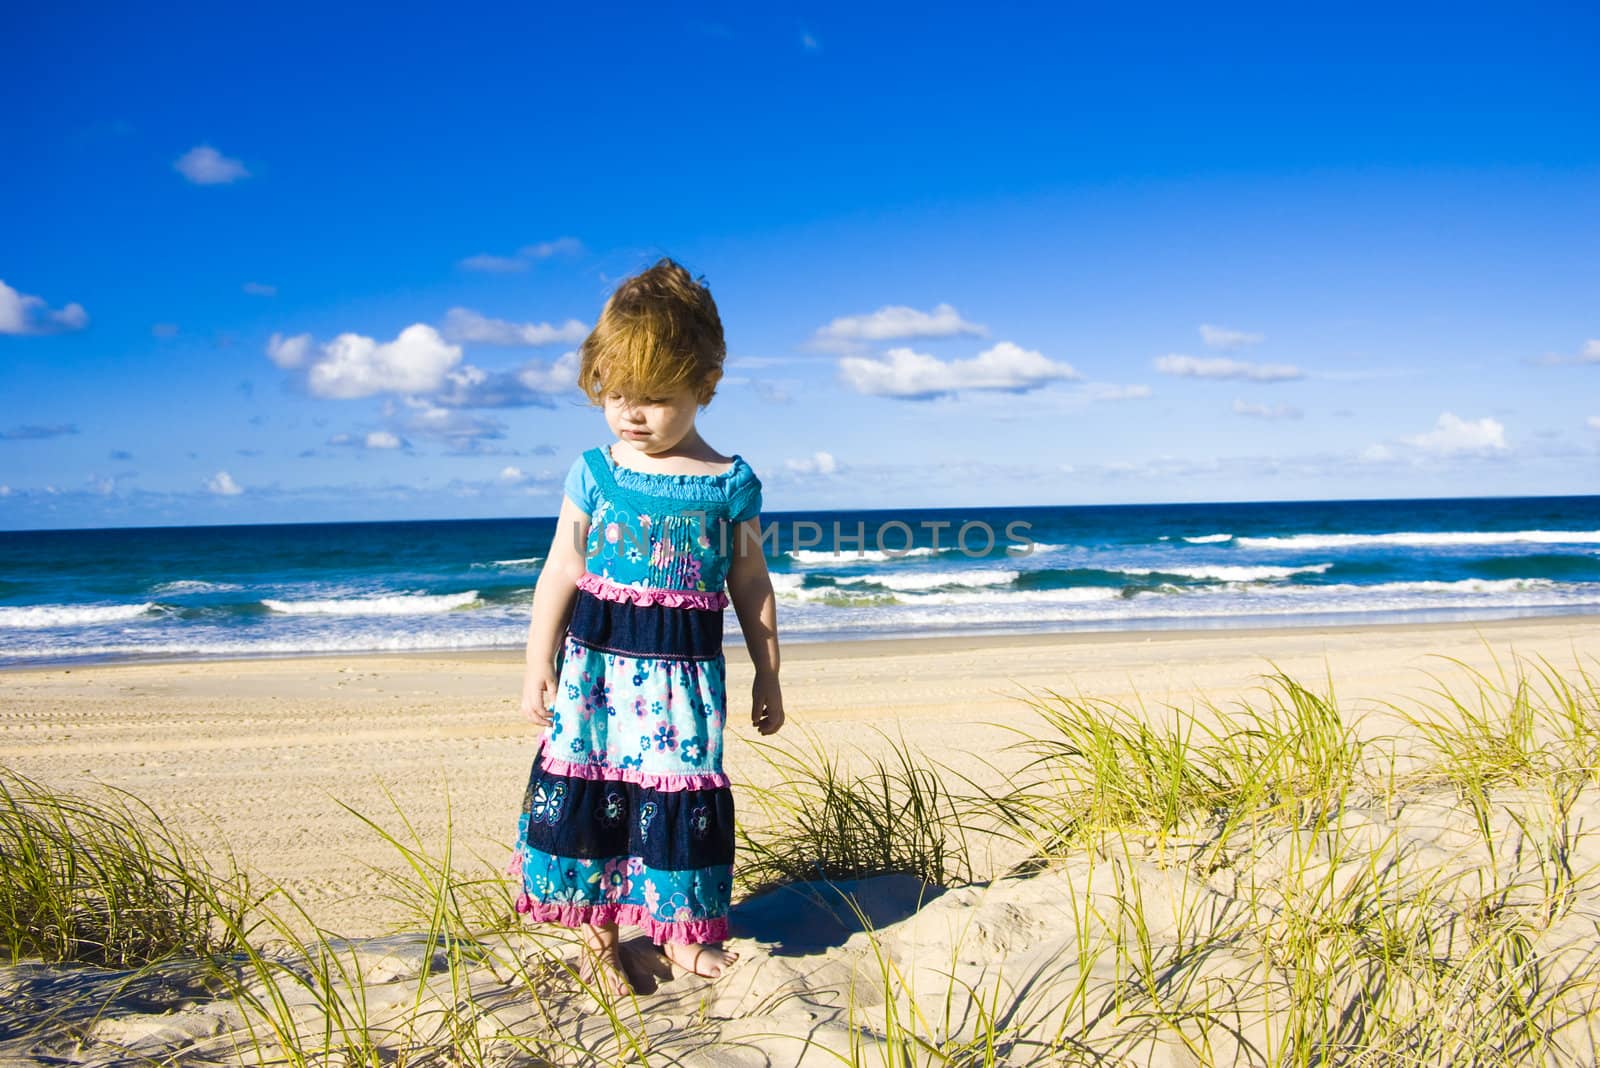 A young girl is wandering around on sand dunes at a beach during a sunny day